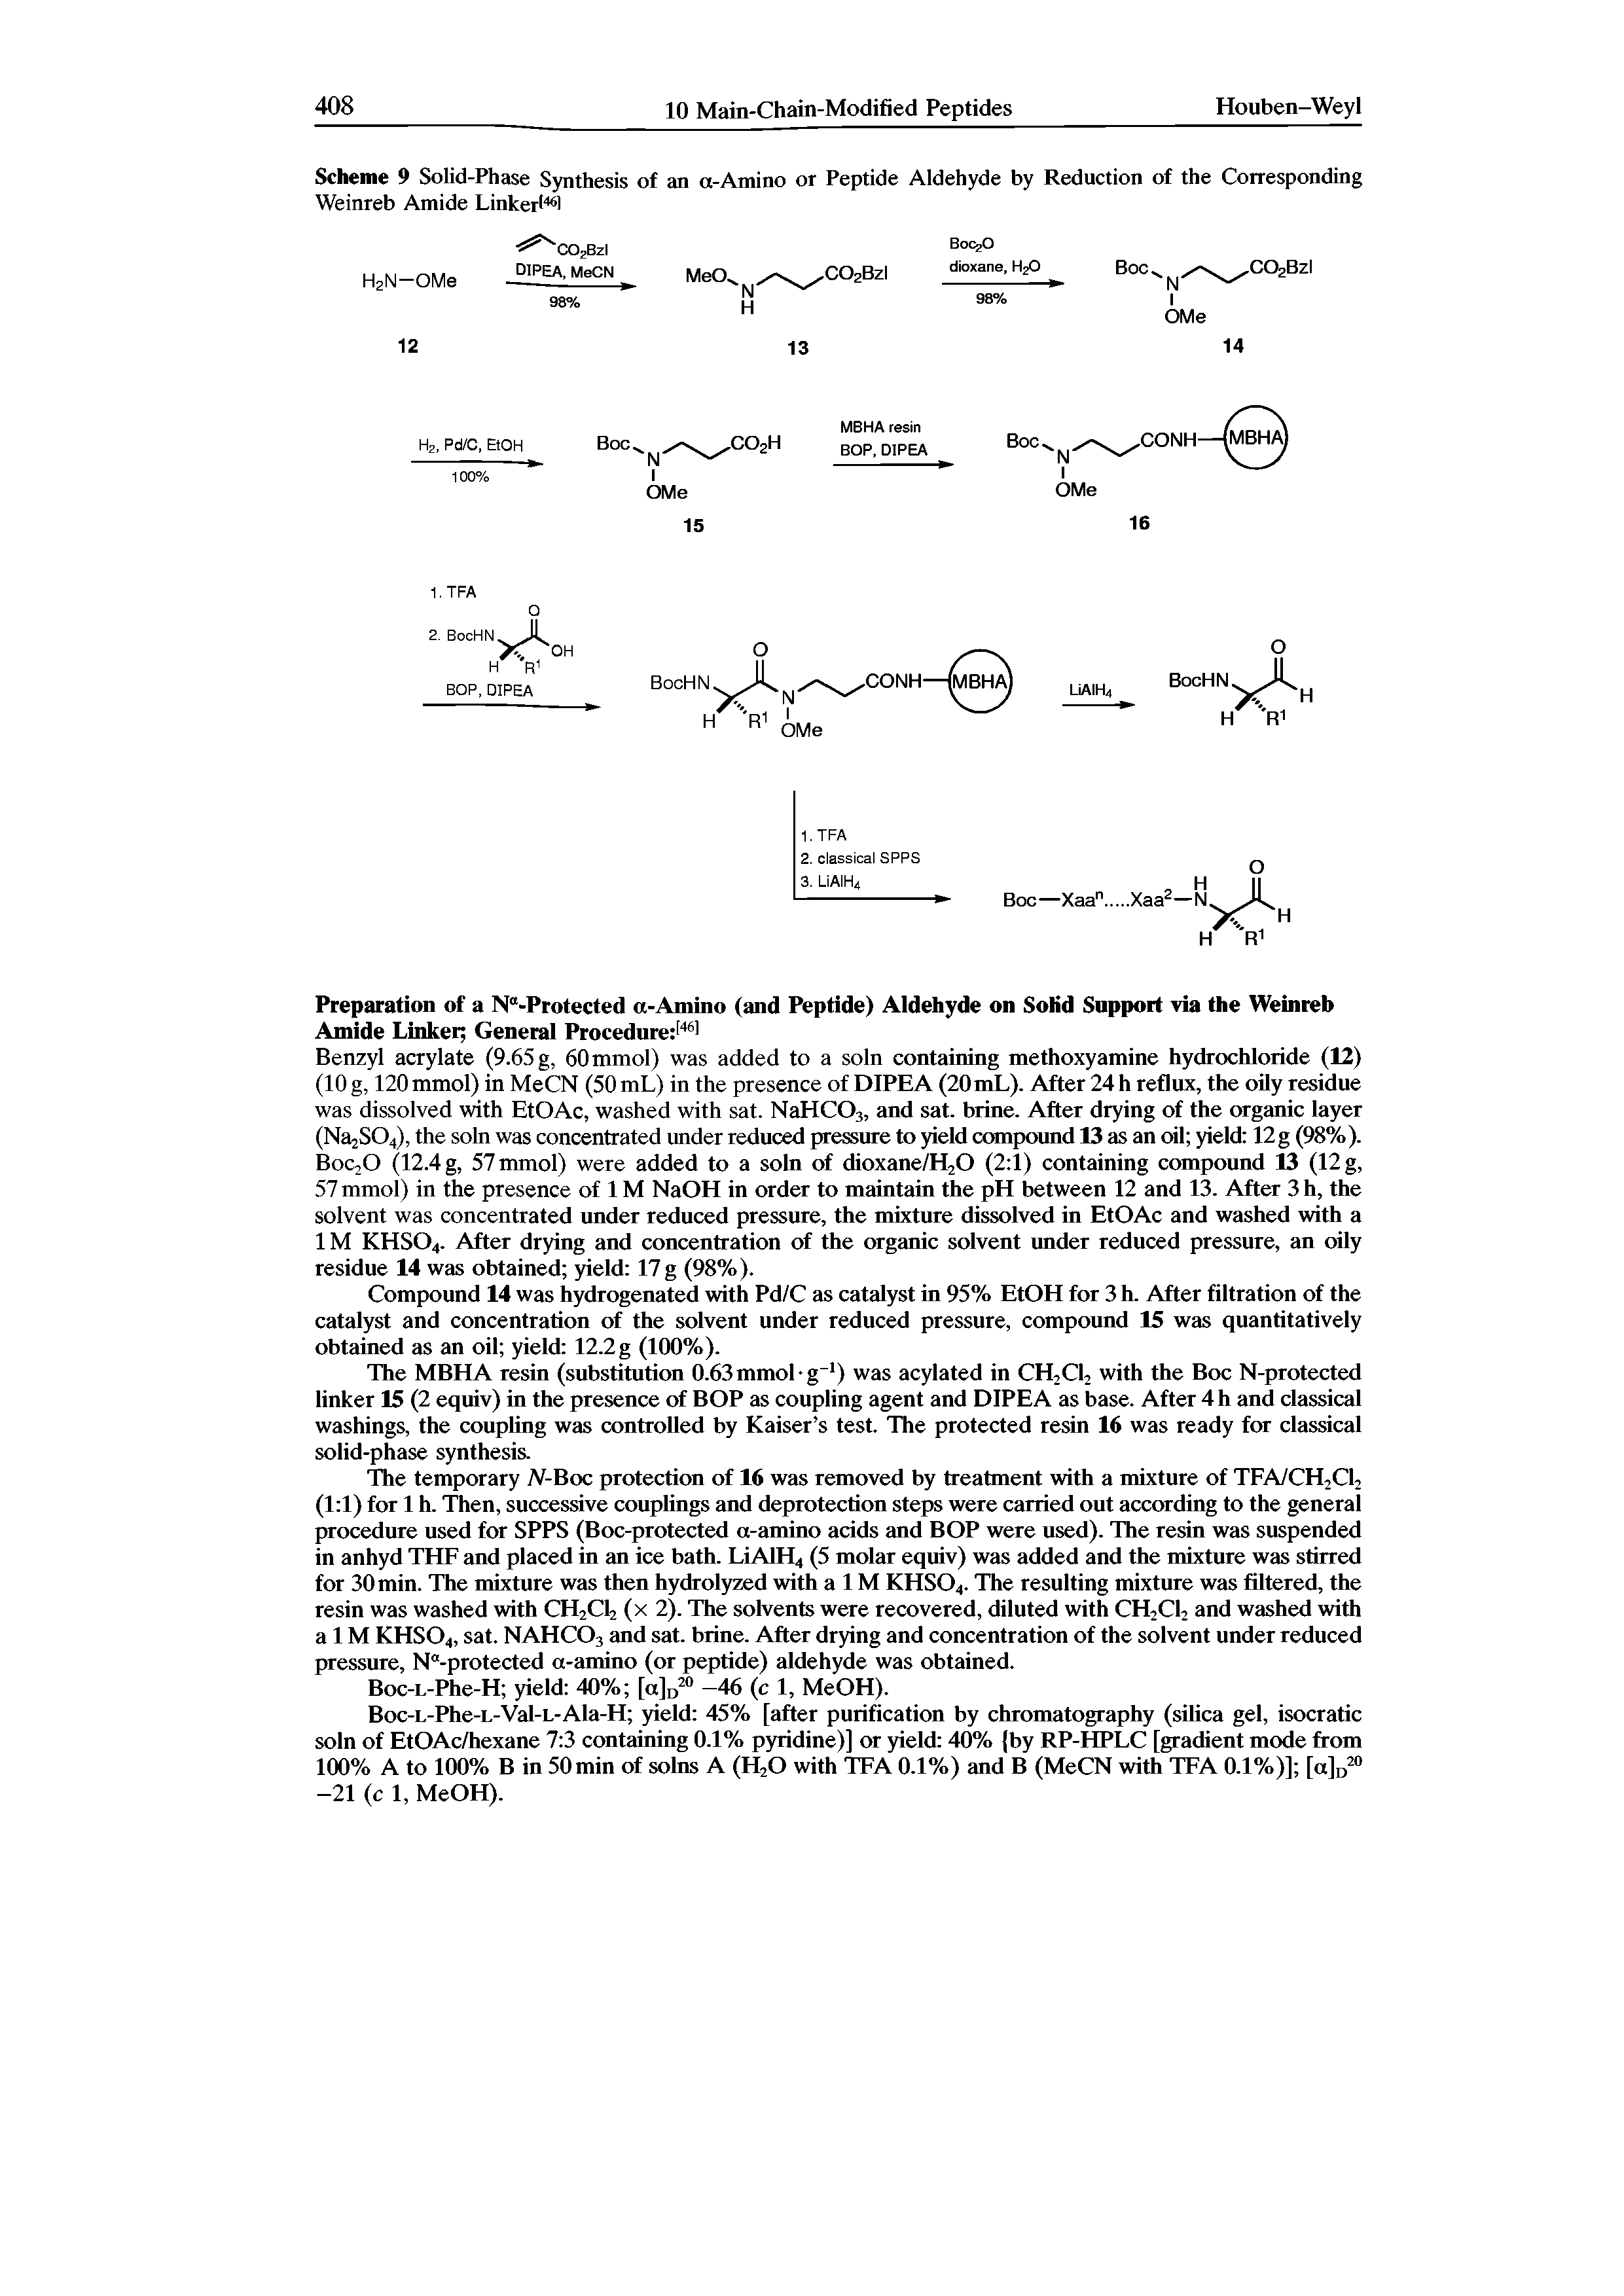 Scheme 9 Solid-Phase Synthesis of an a-Amino or Peptide Aldehyde by Reduction of the Corresponding Weinreb Amide LinkerN...